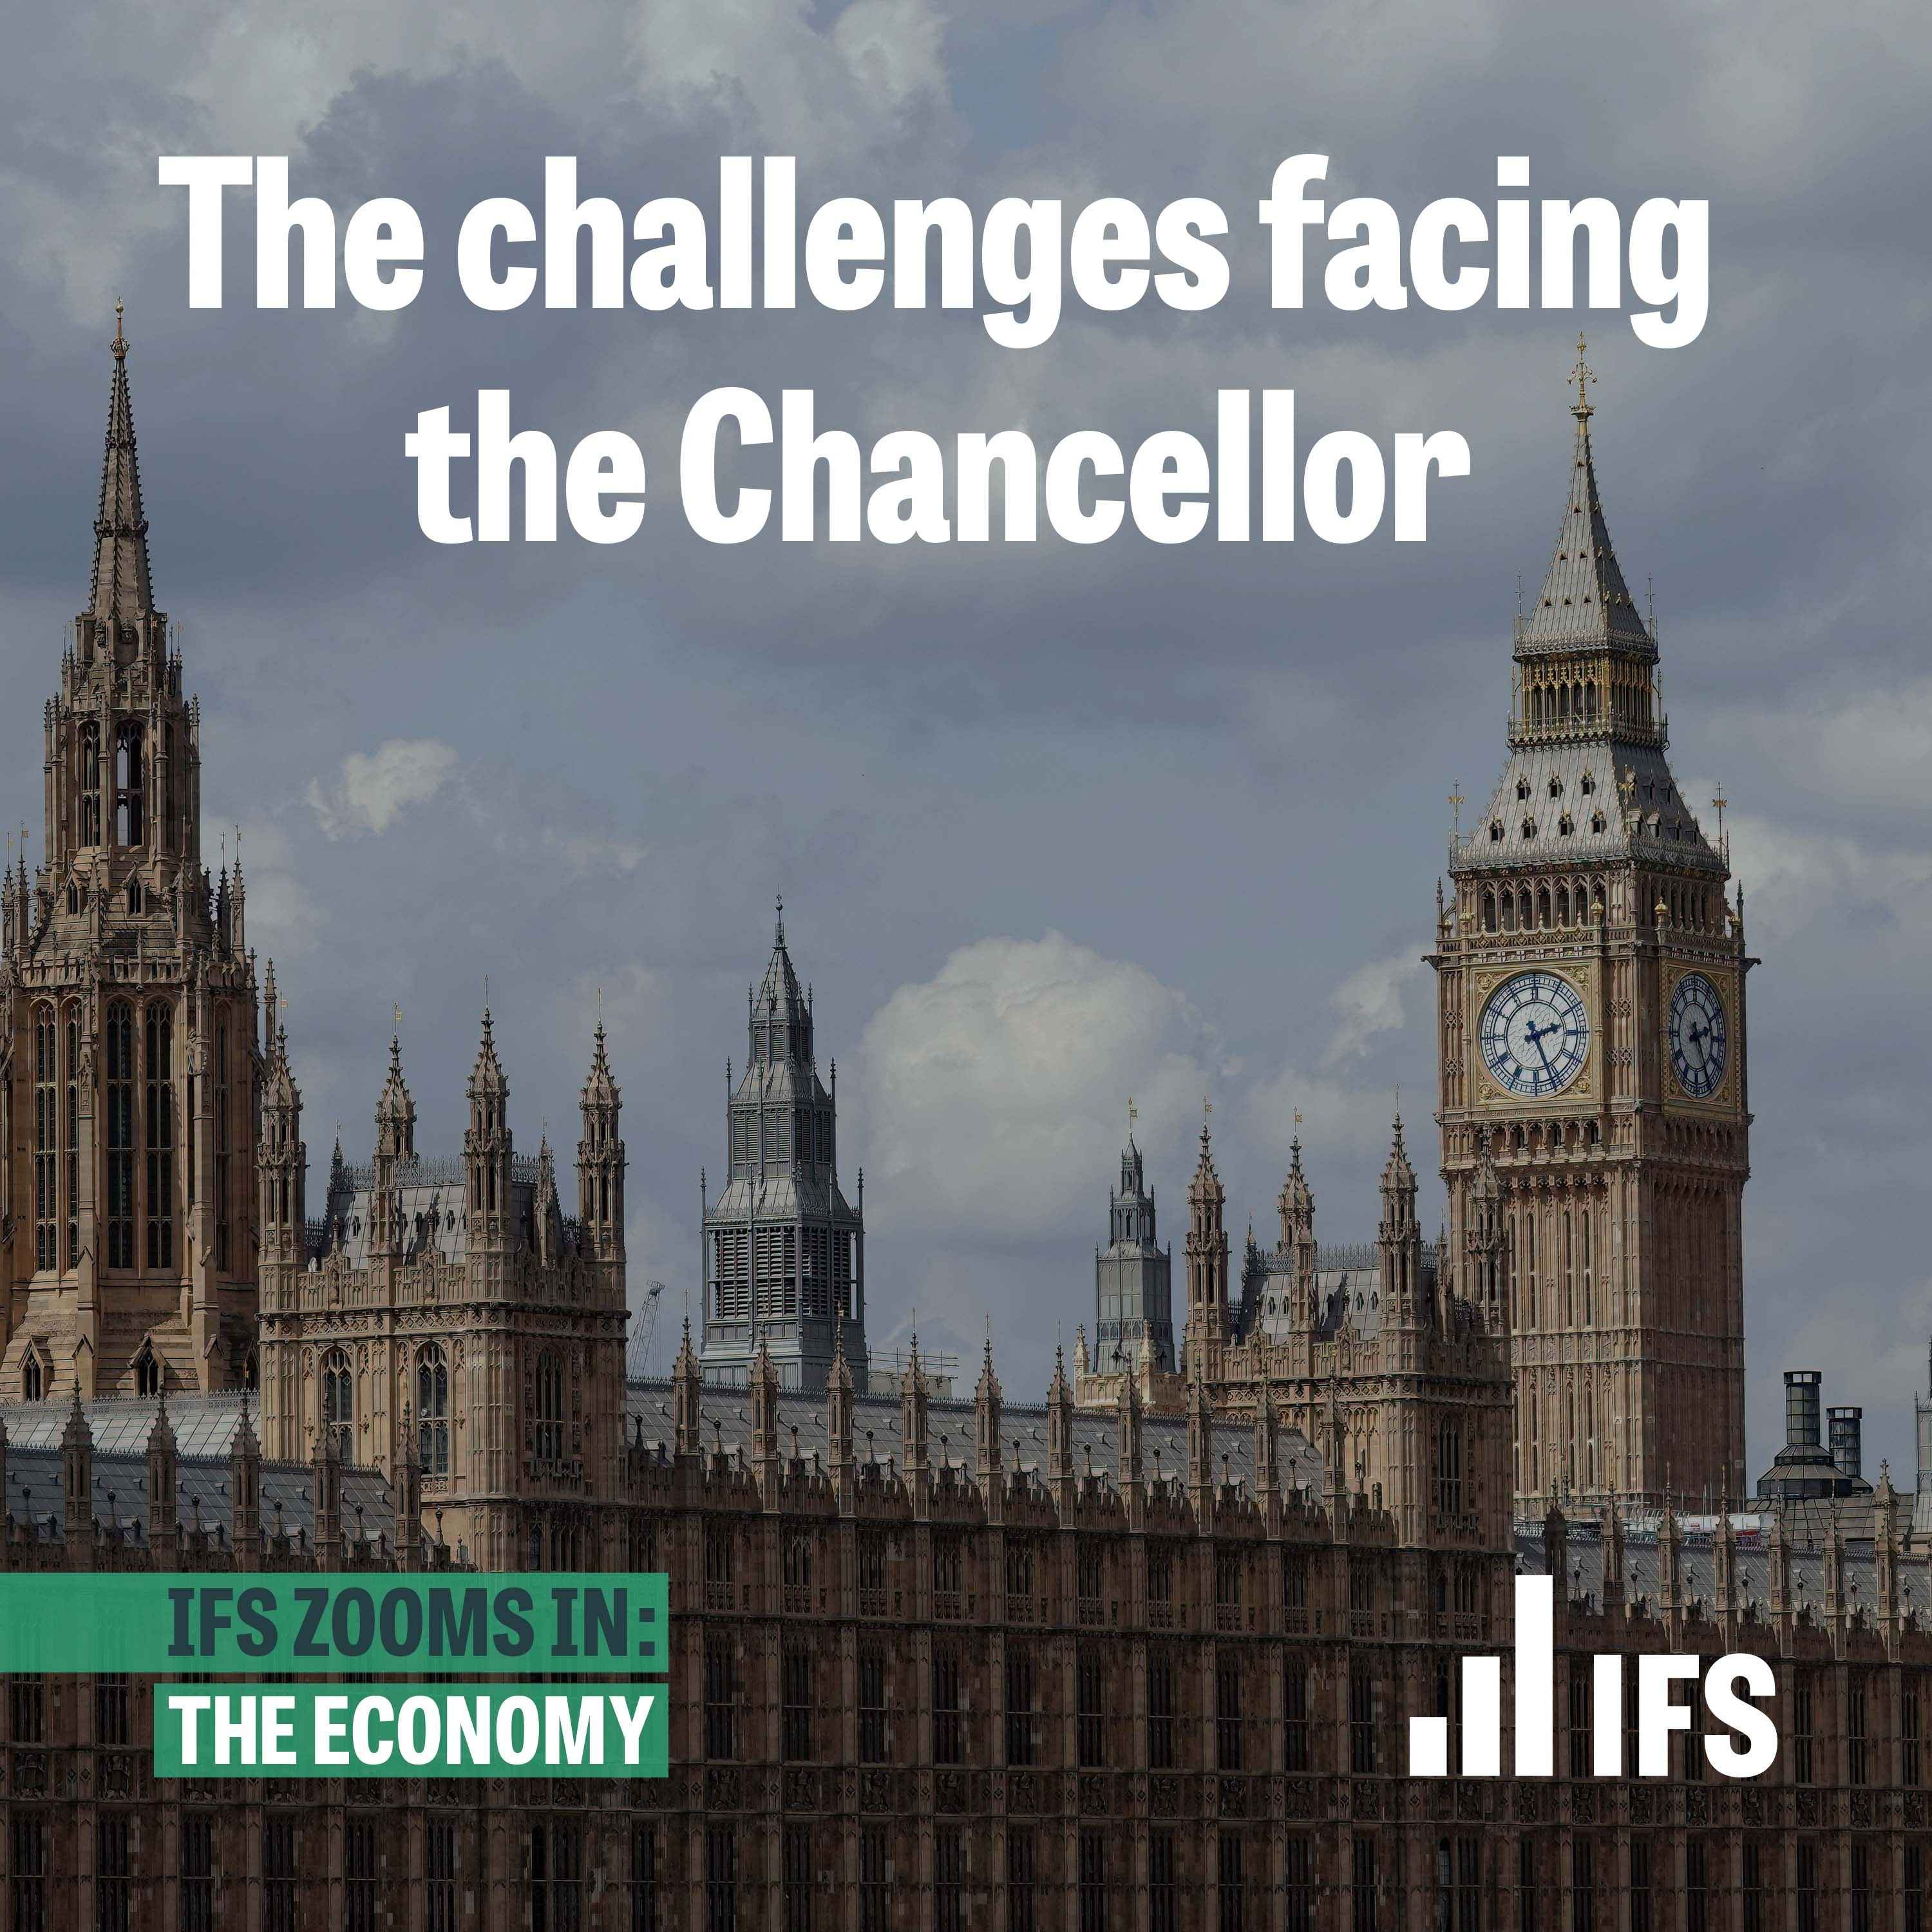 The challenges facing the Chancellor